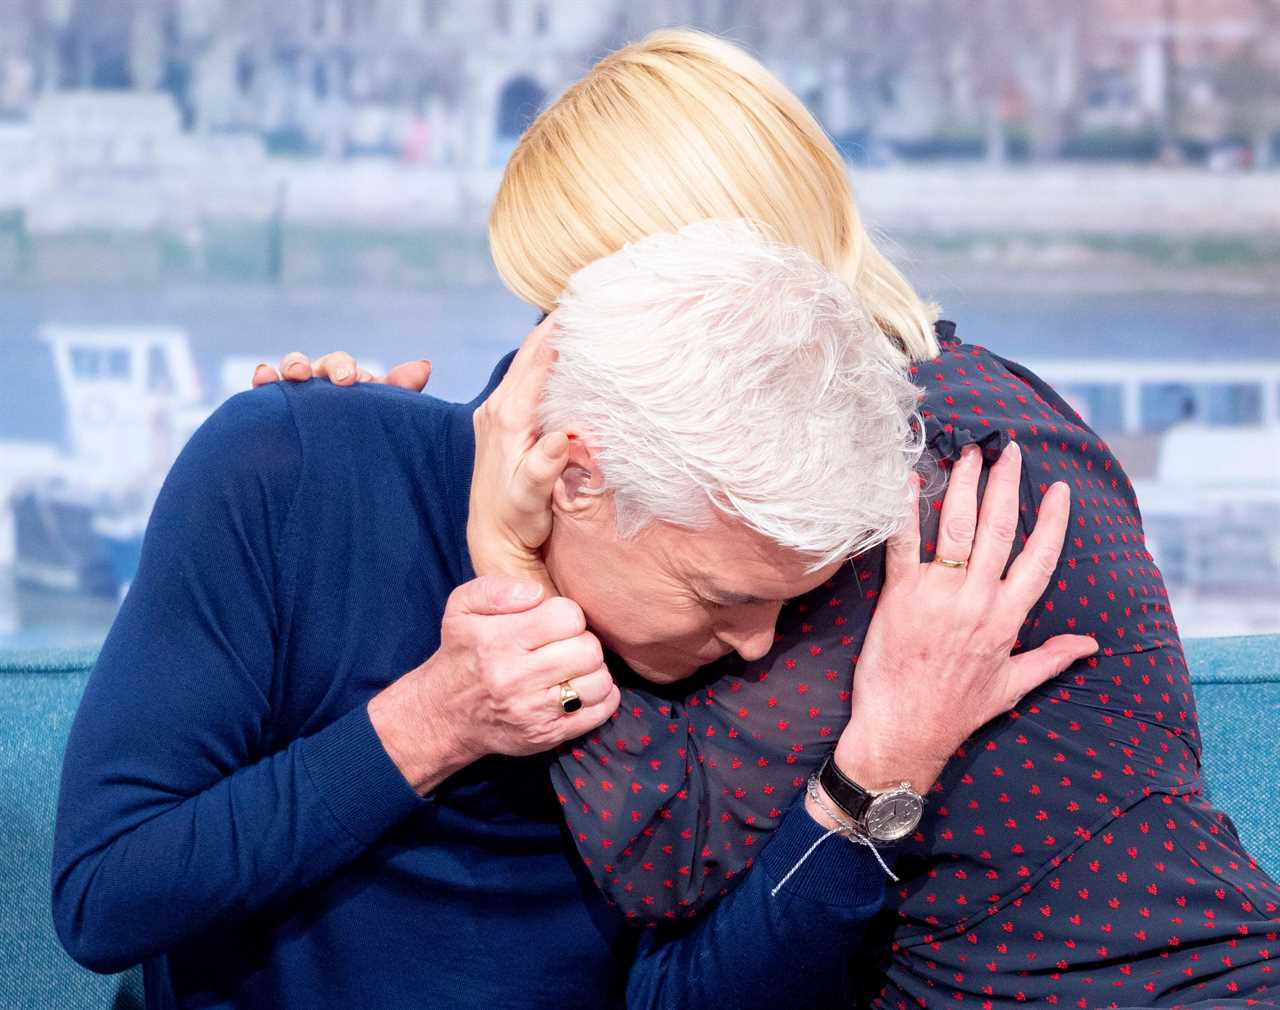 ITV loses millions in sponsor deals over Phillip Schofield affair as ex-star’s photos are removed from This Morning set